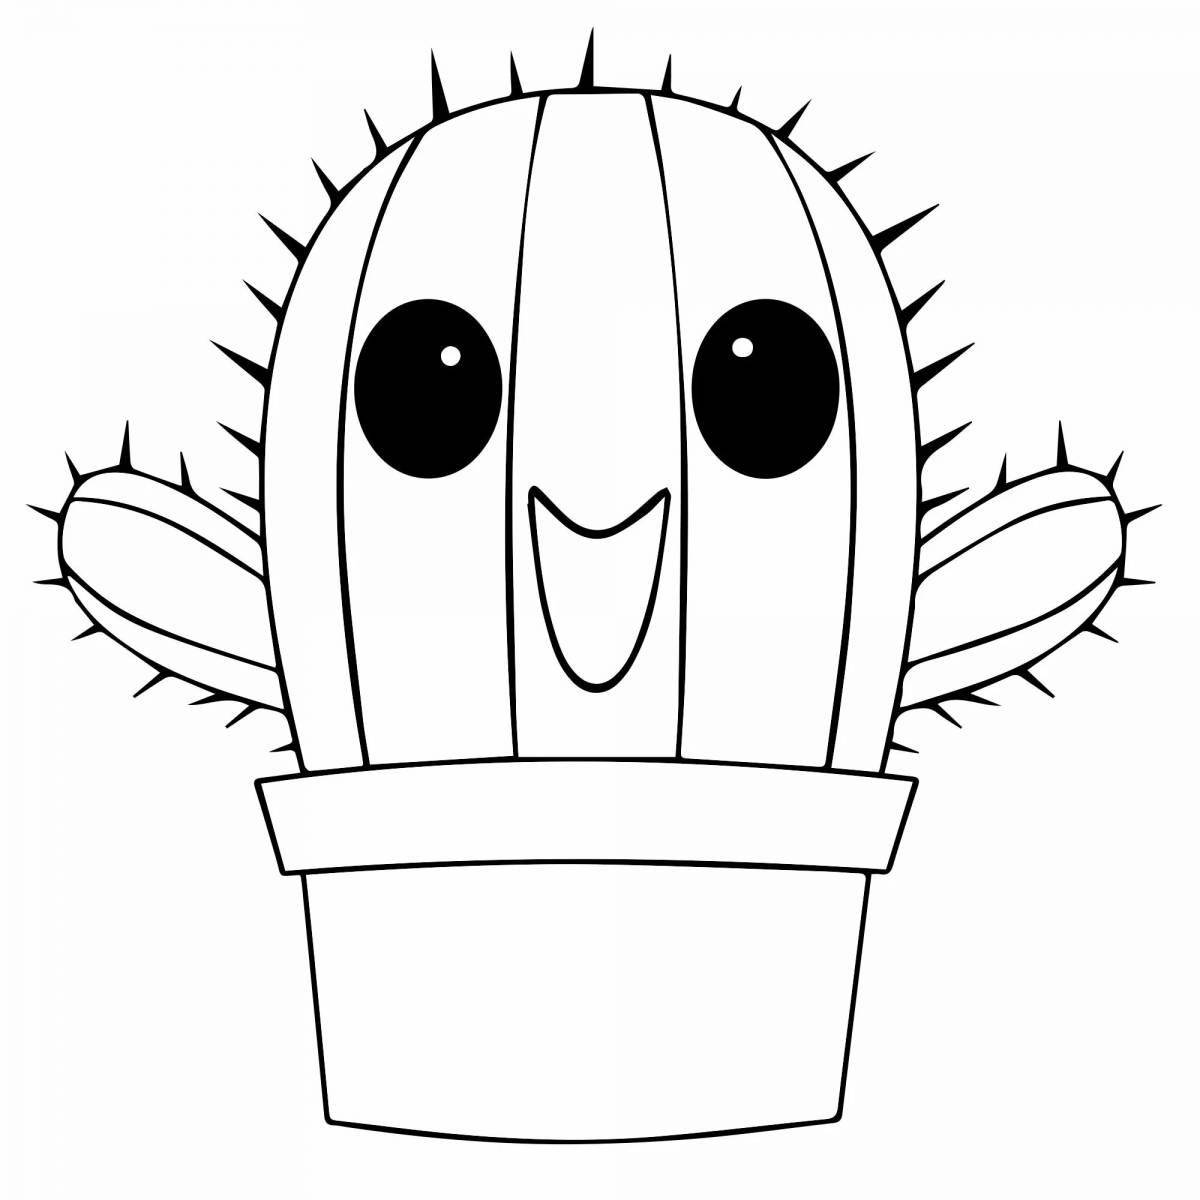 Fabulous cacti coloring for kids